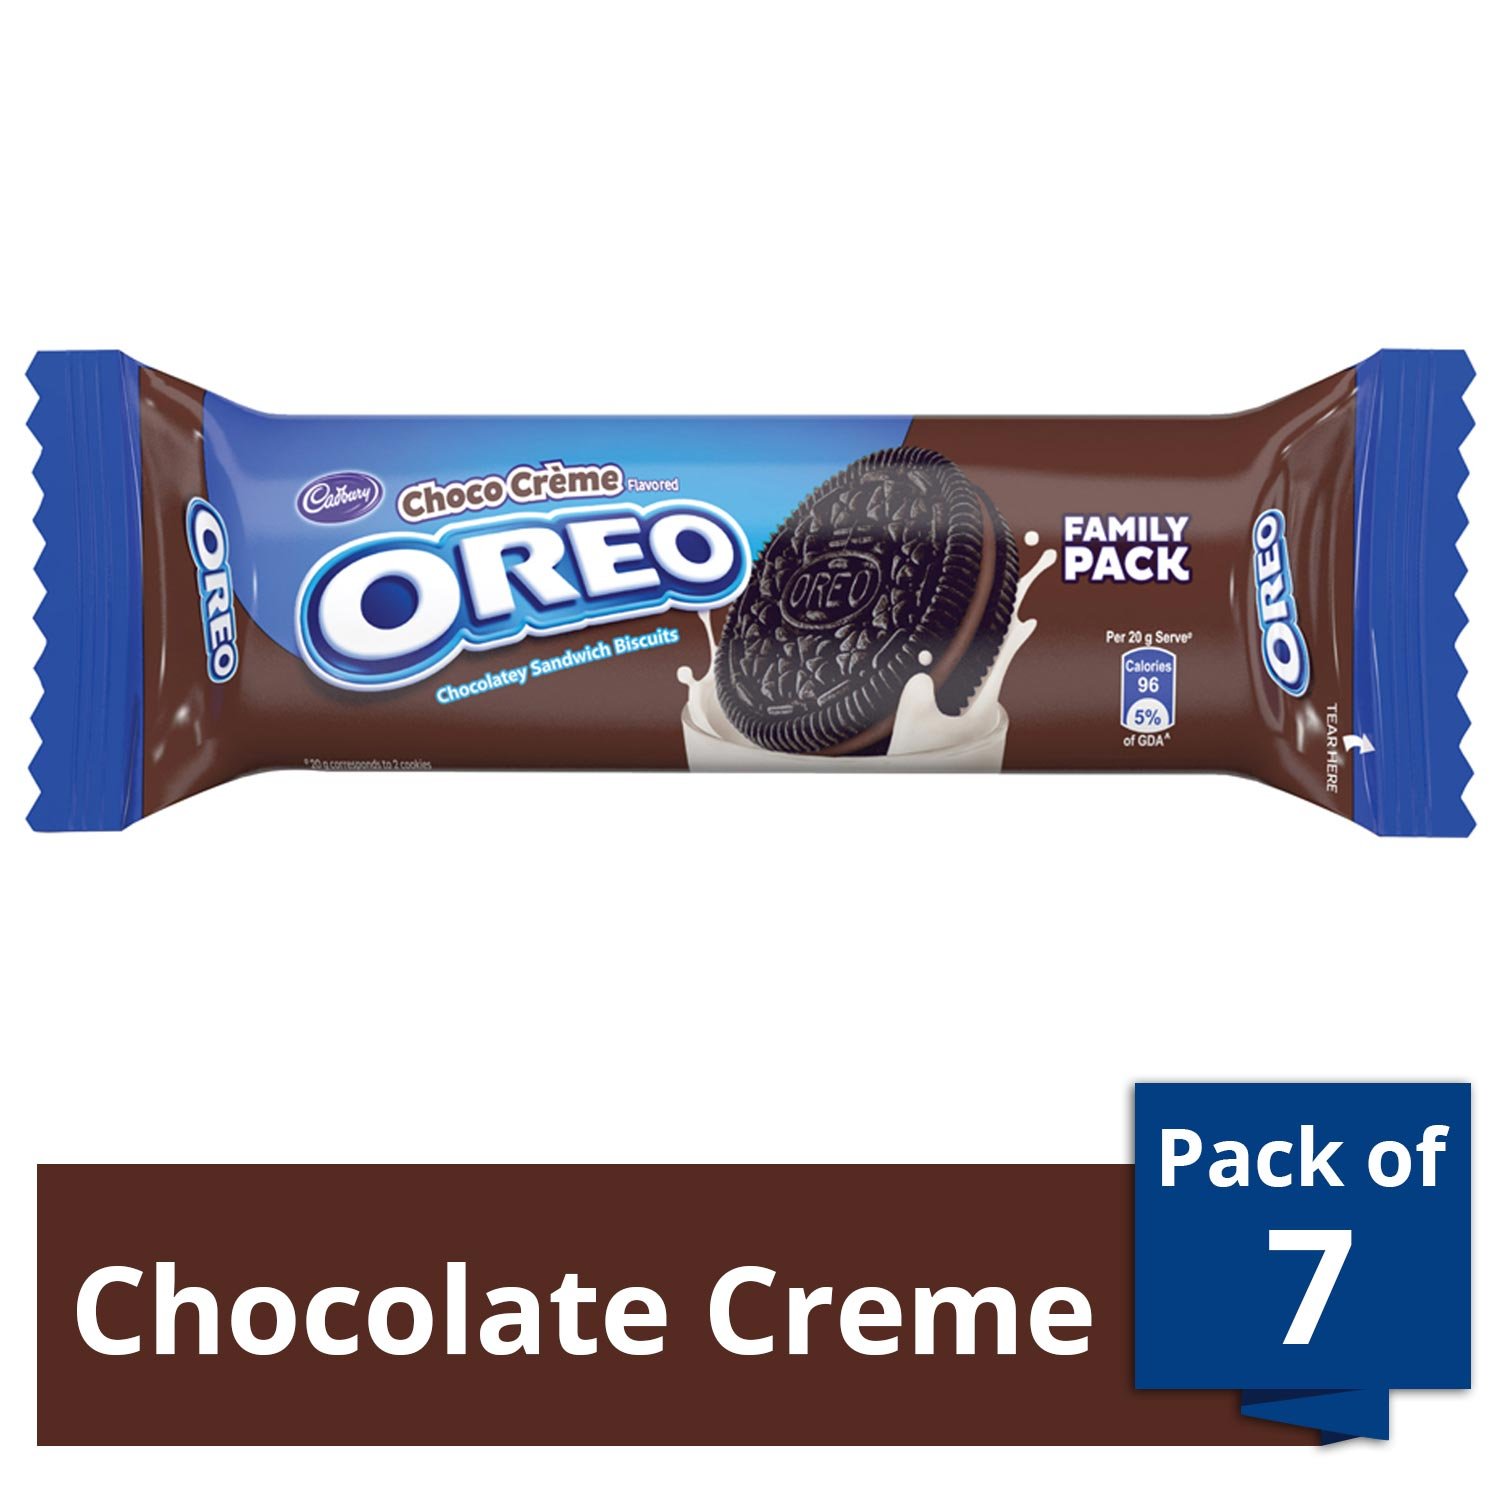 Oreo Choco Creme Biscuit - Pack of 8